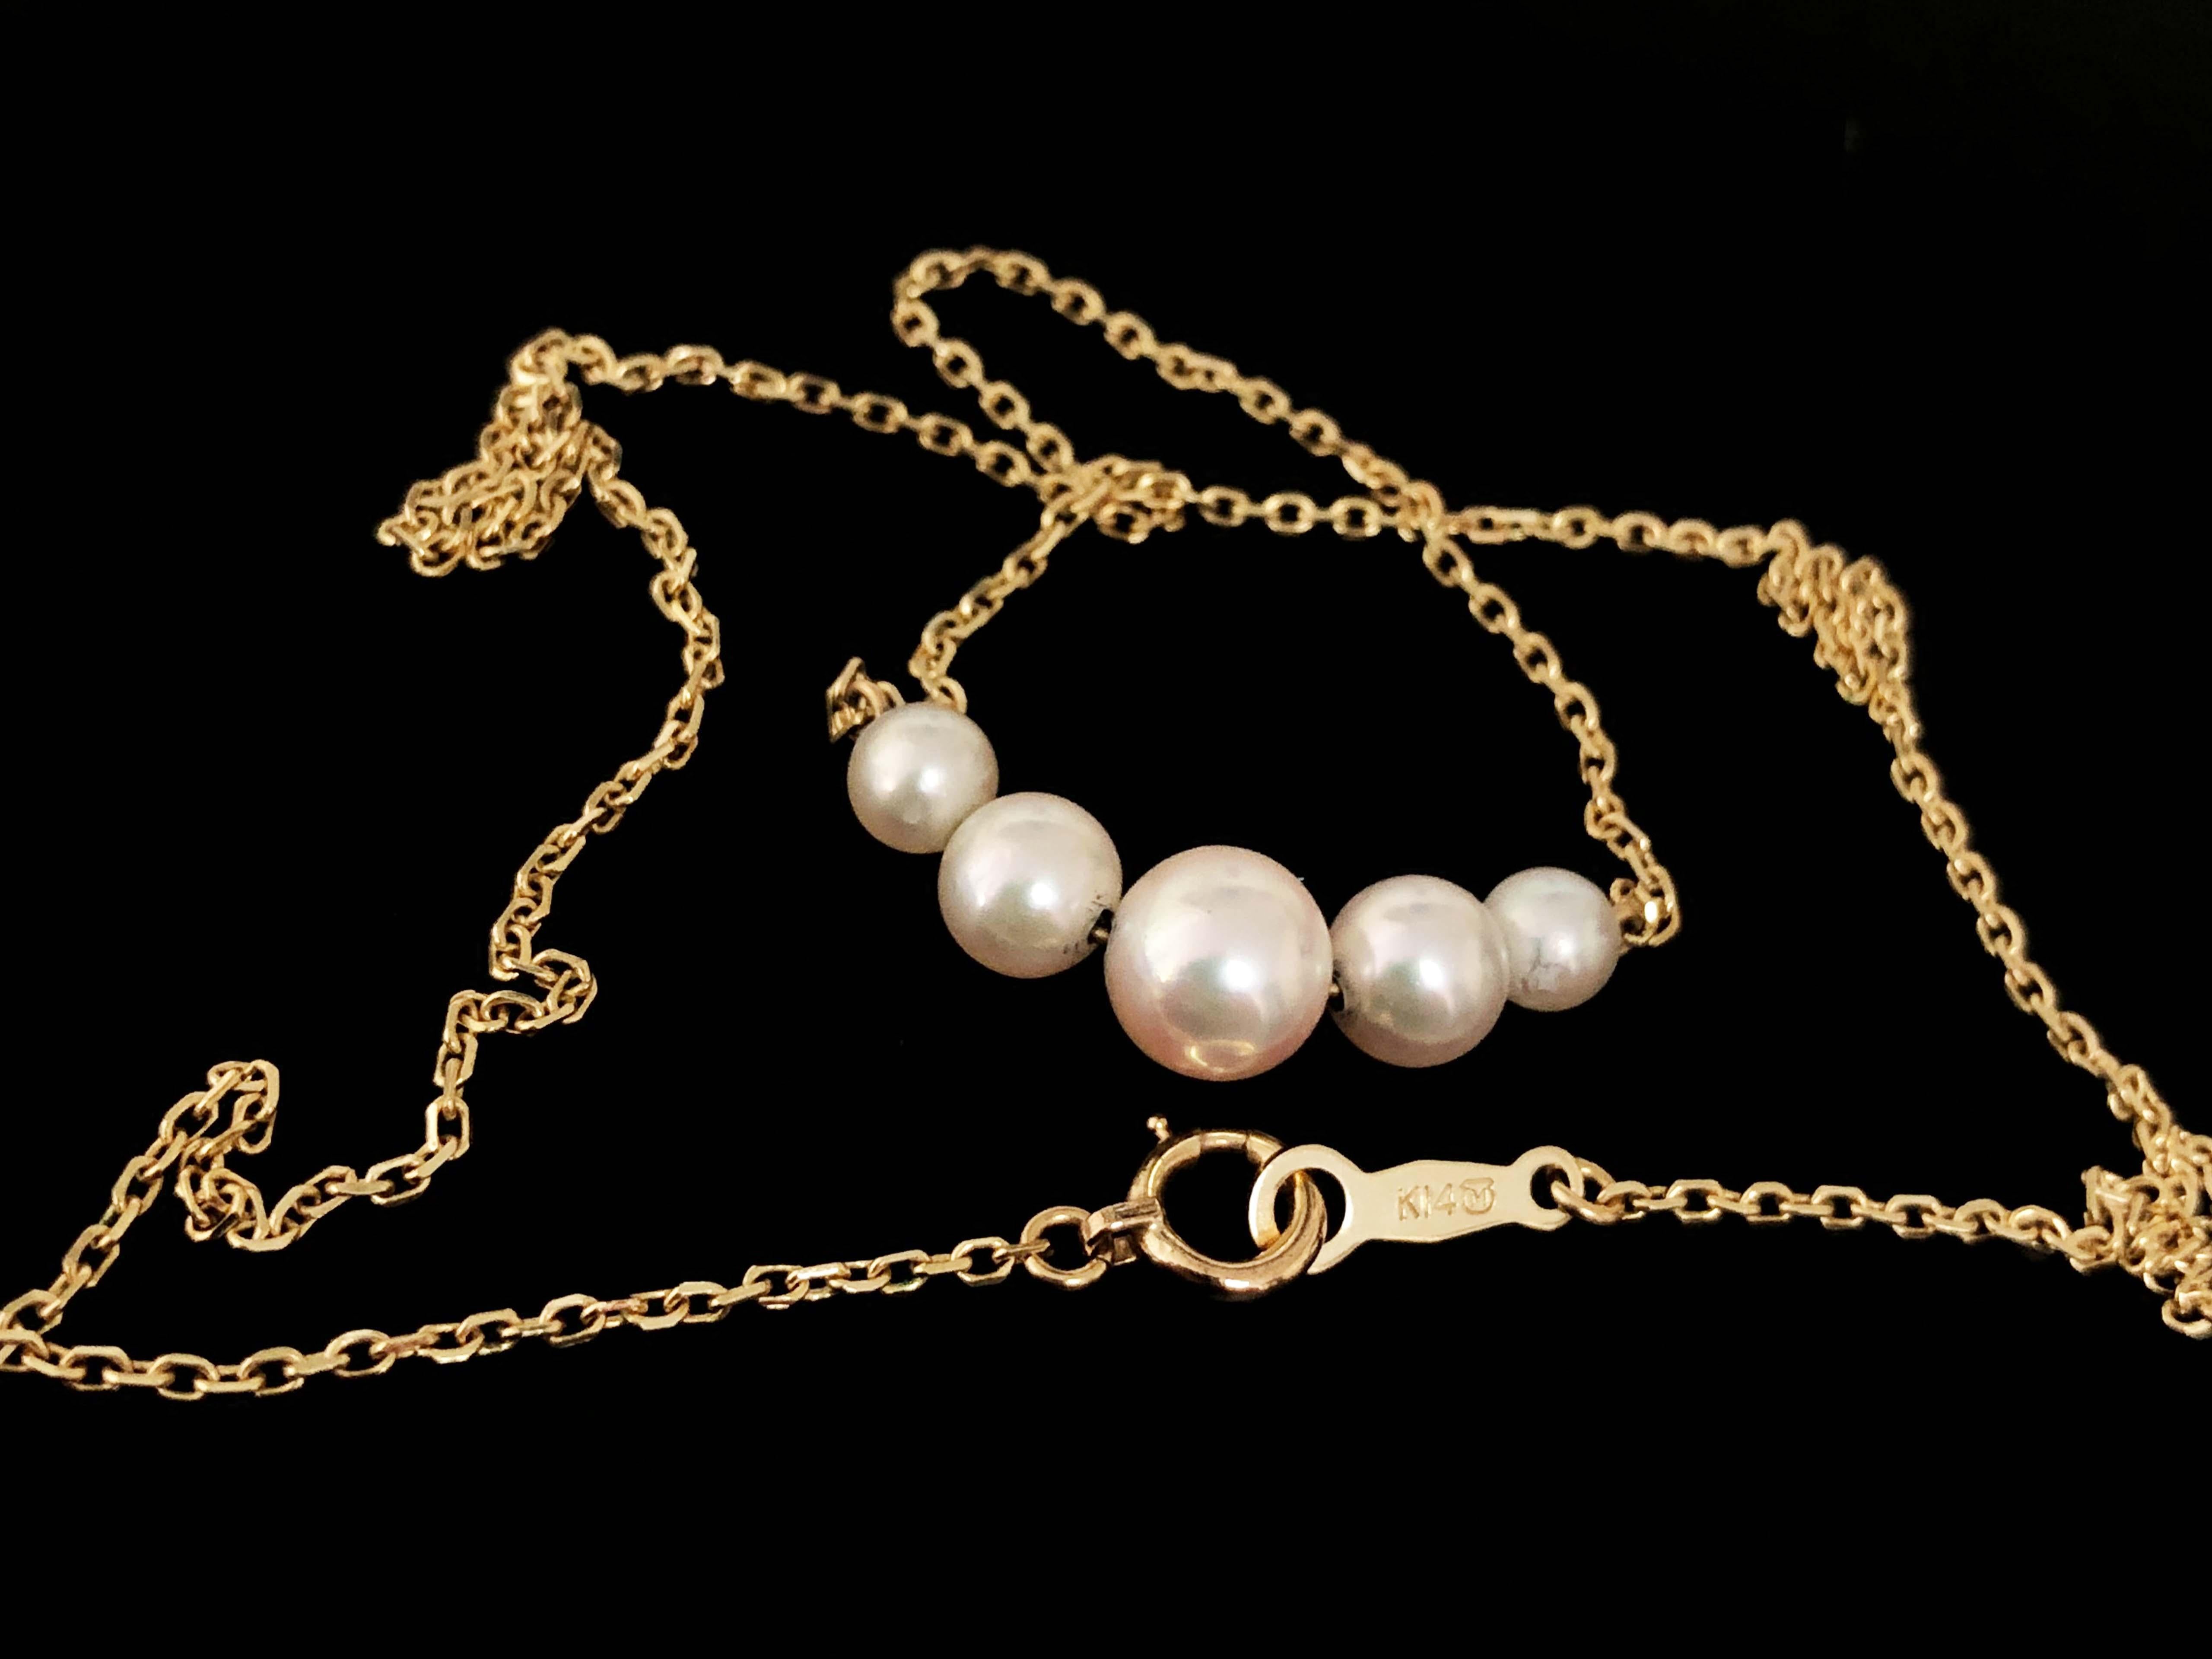 Mikimoto 5 Pearl Necklace in 14k Yellow Gold 1